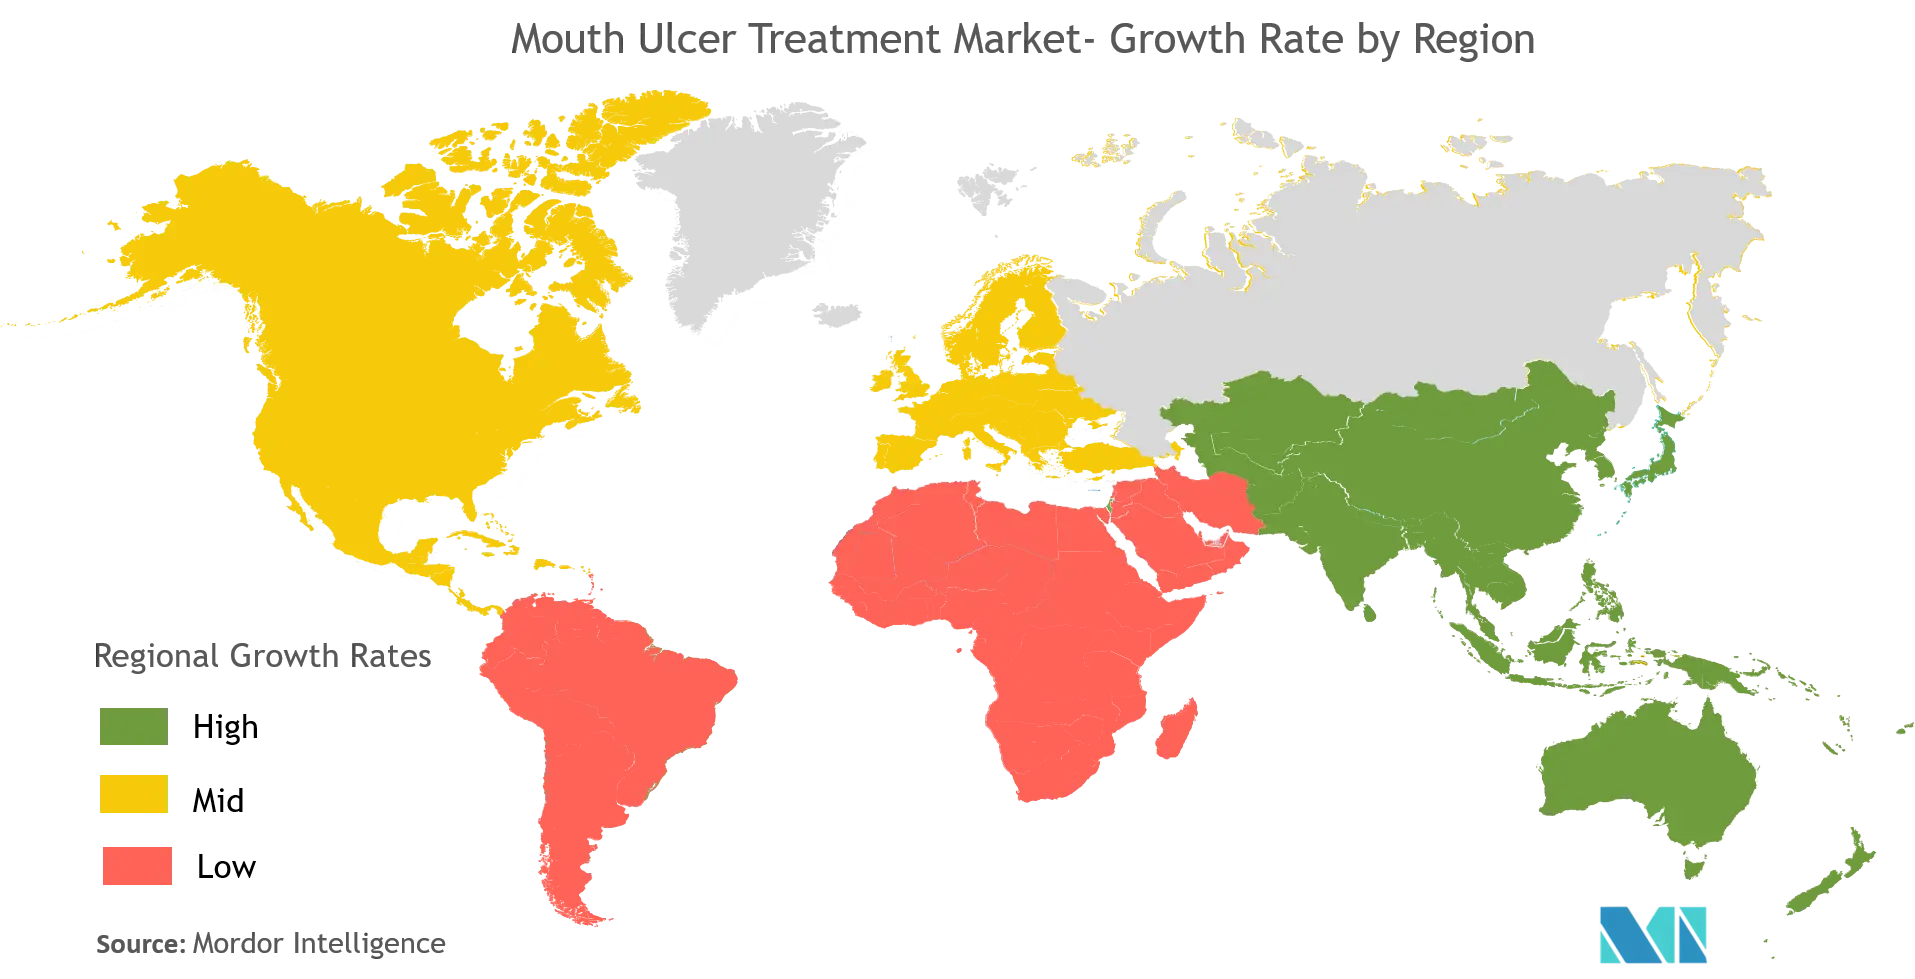 Mouth Ulcer Treatment Market - Growth Rate by Region